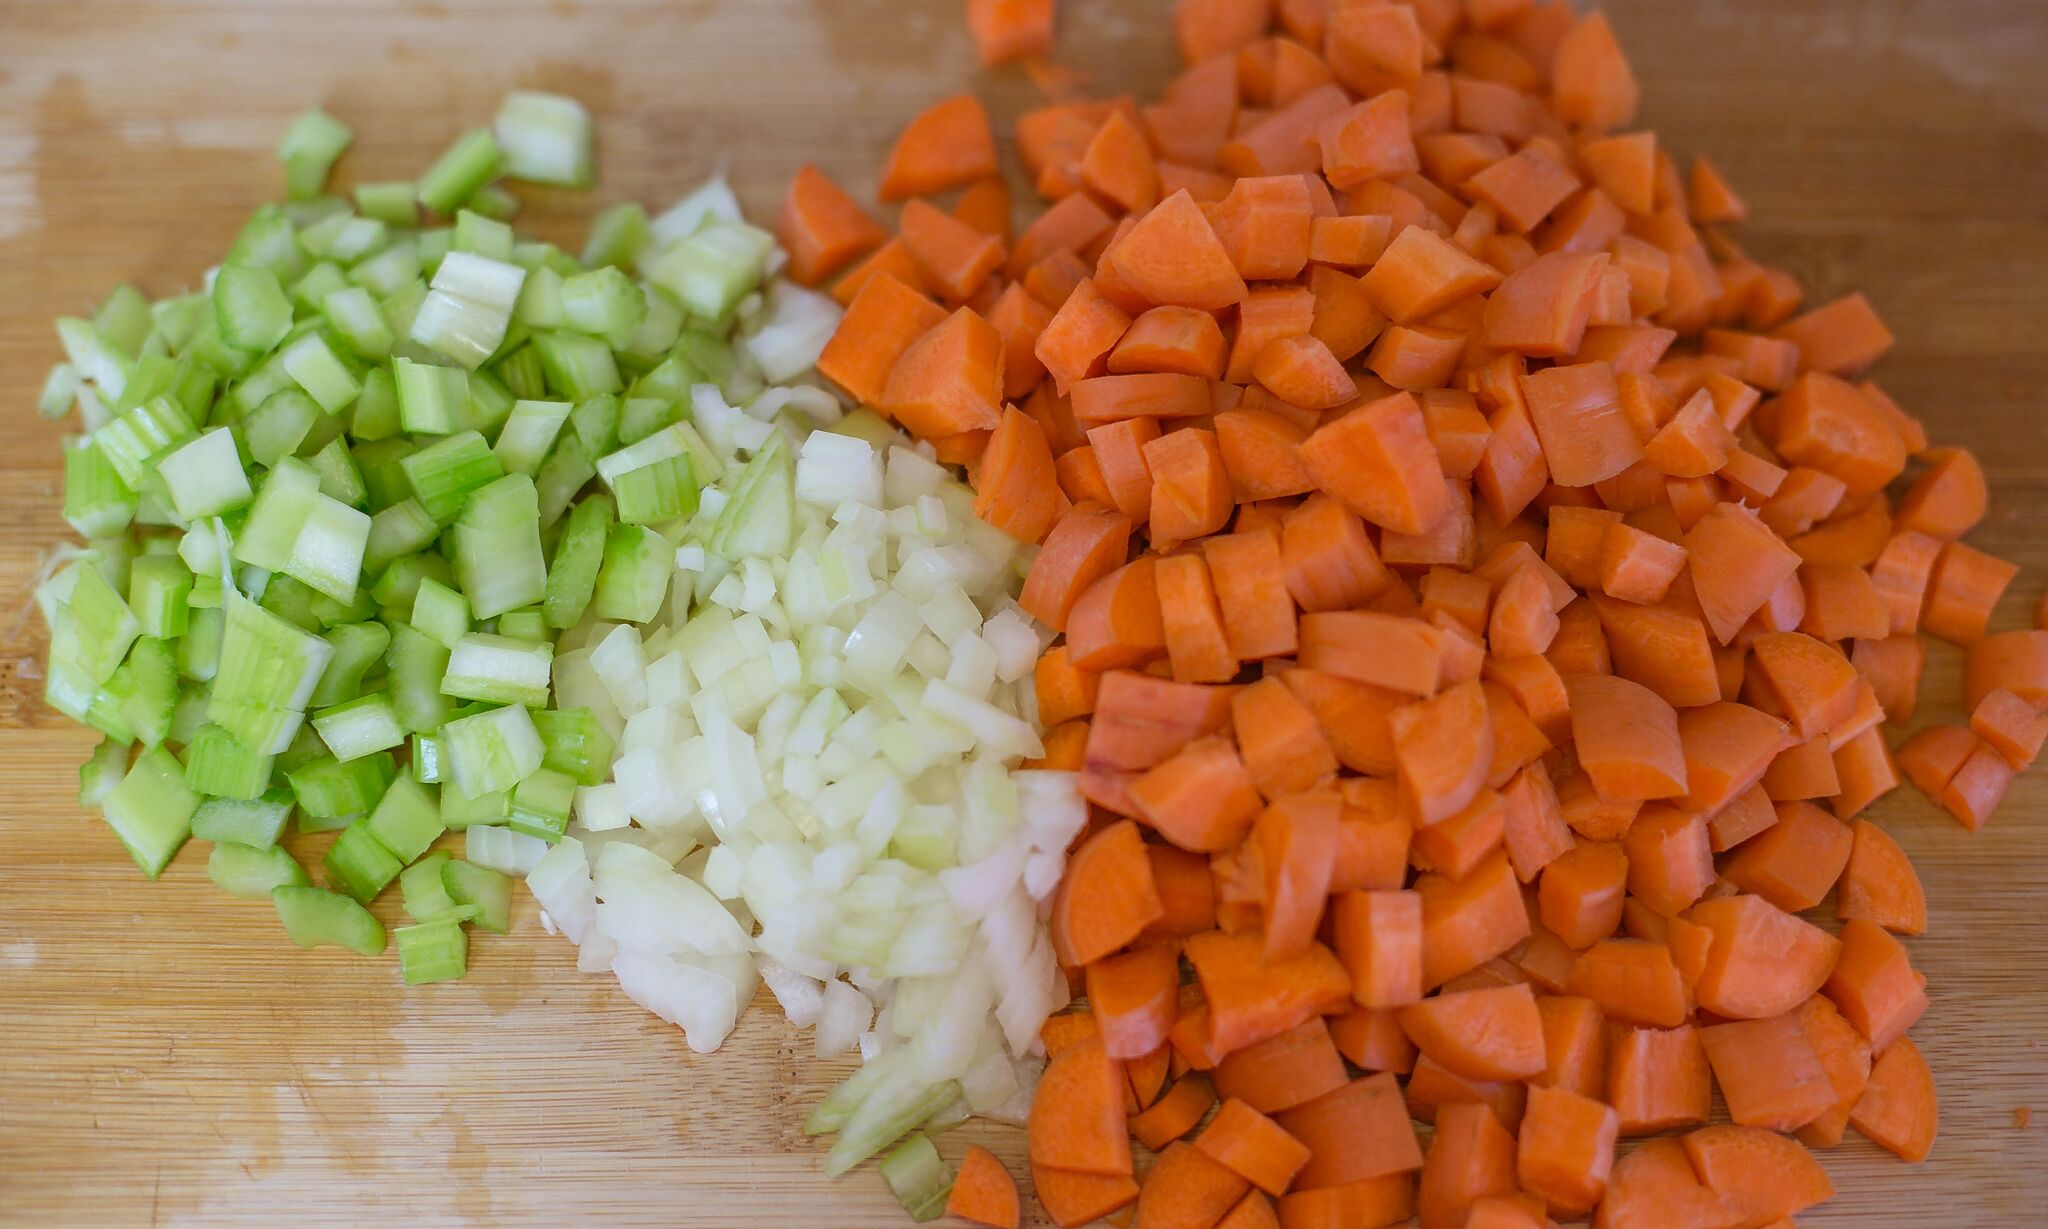 Dice onion, carrots and celery and set aside.